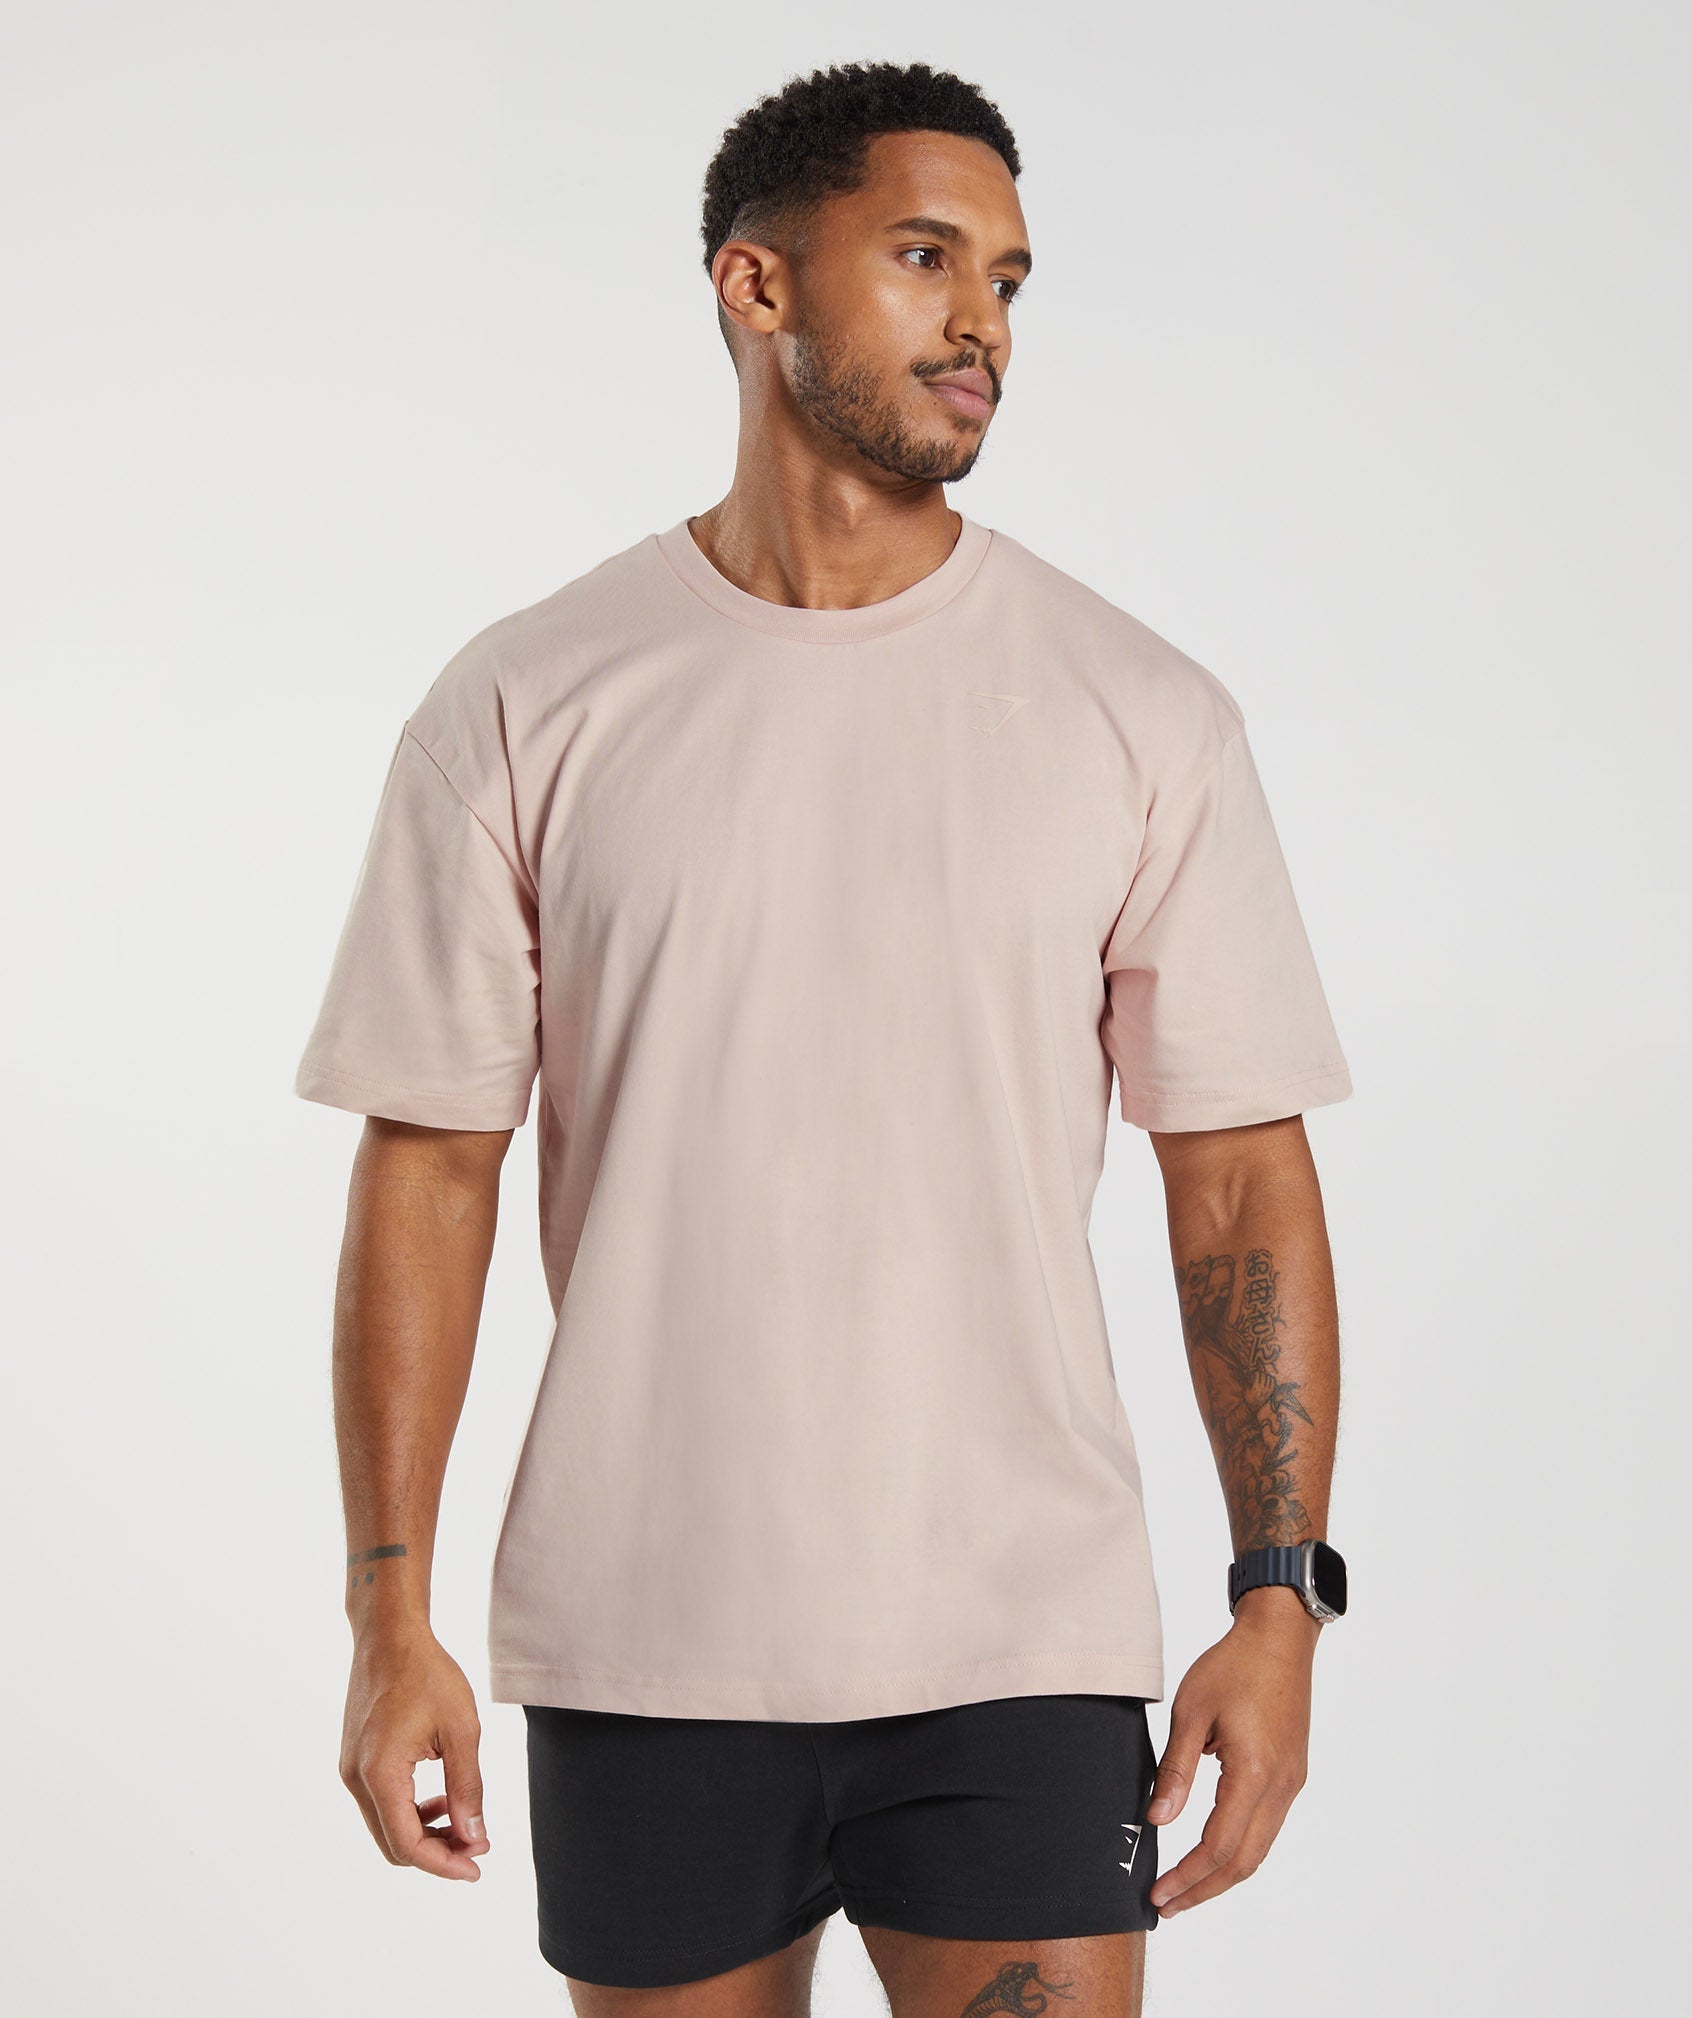 Oversized Sharkhead T-Shirt in Misty Pink - view 2